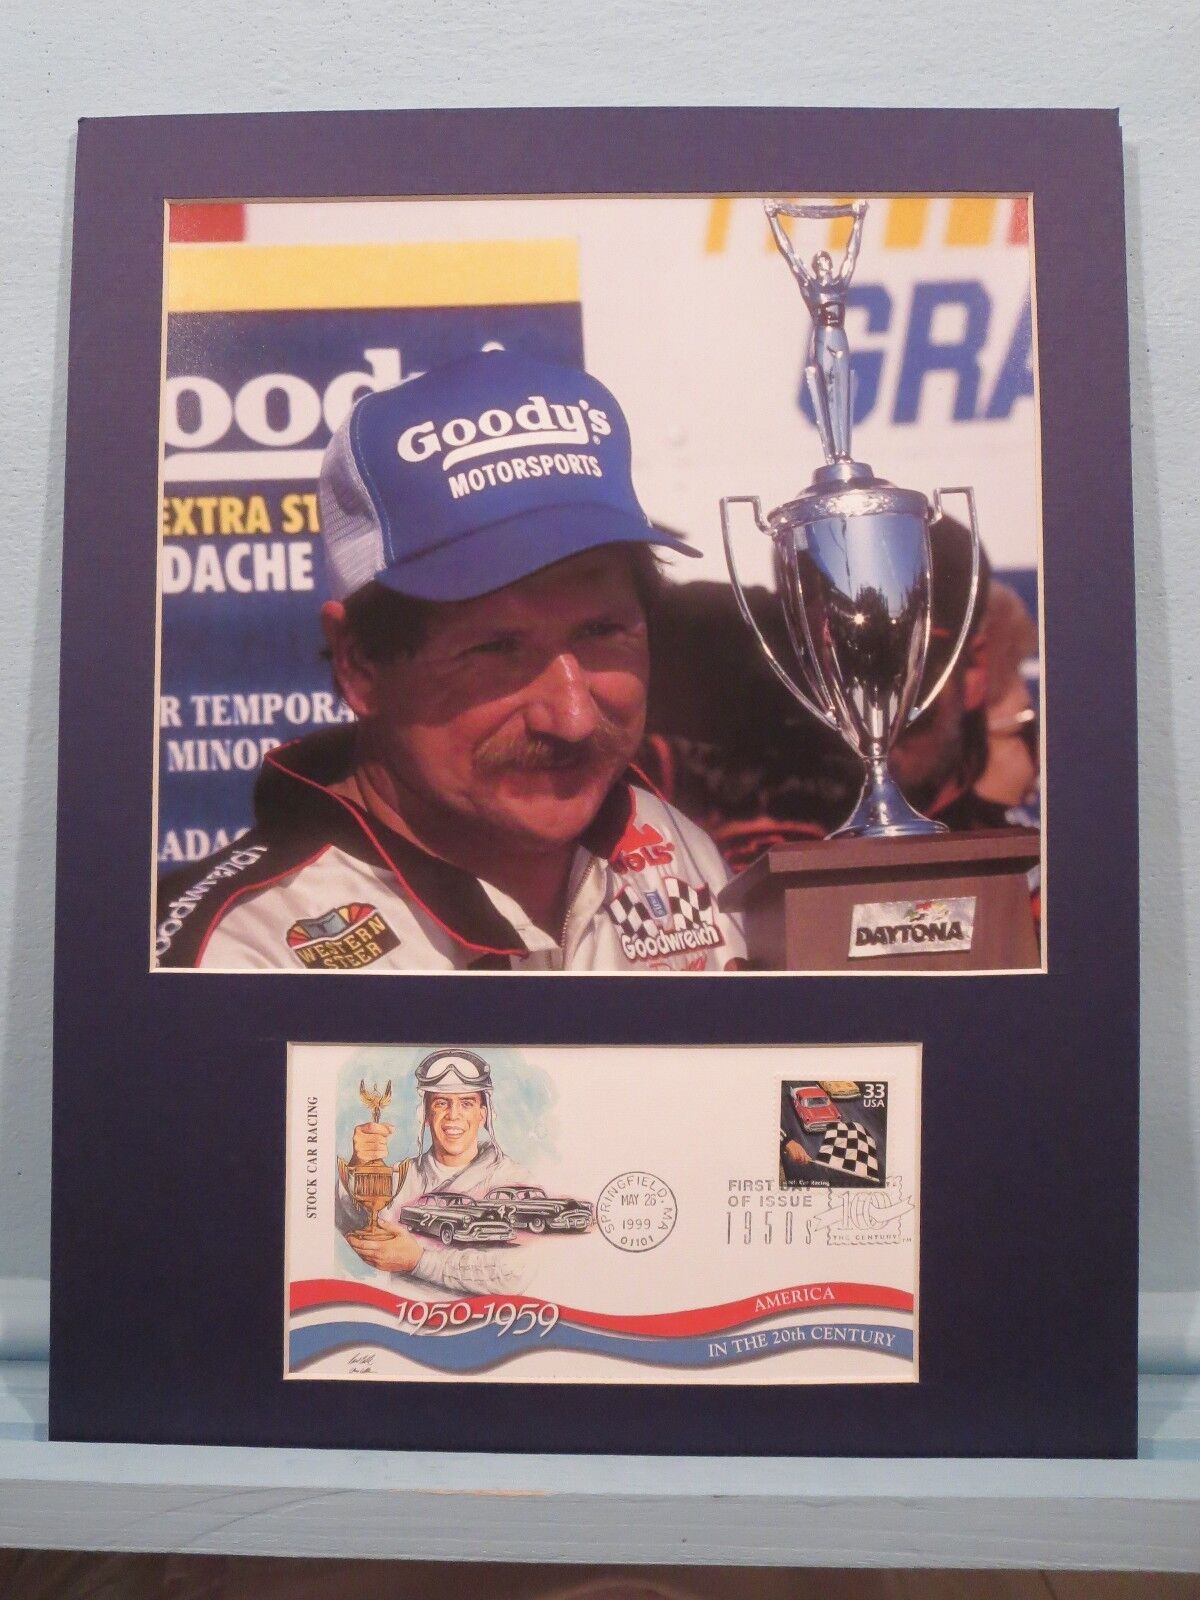 Dale Earnhardt Wins the 1998 Daytona 500  & First day Cover of N